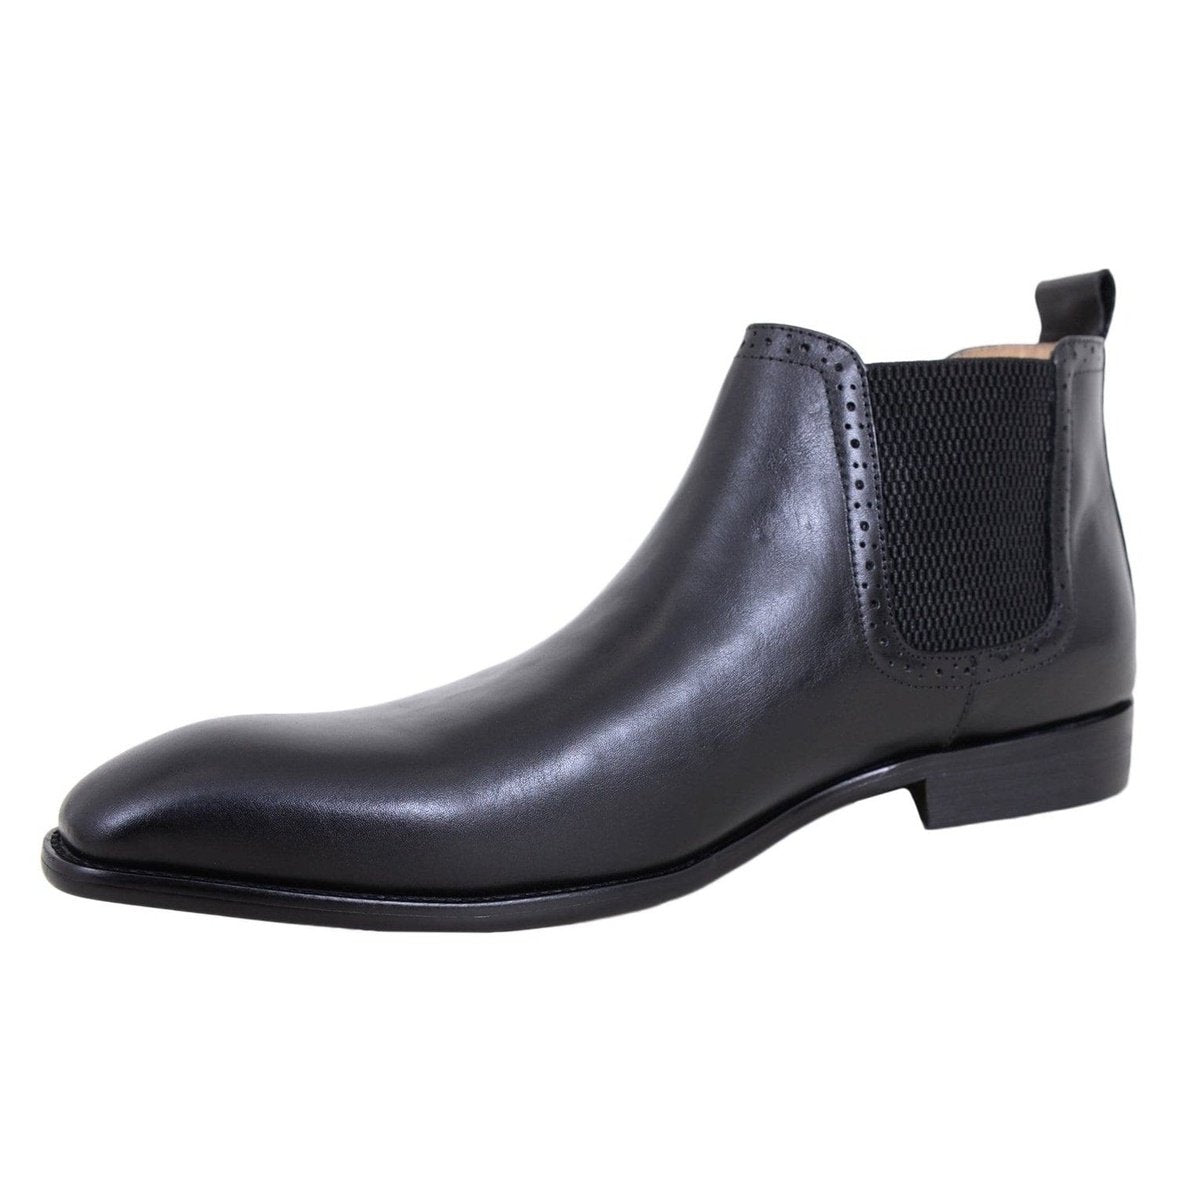 Carrucci Shoes For Amazon Carrucci Solid Black Slip On Leather Ankle Chelsea Dress Boots